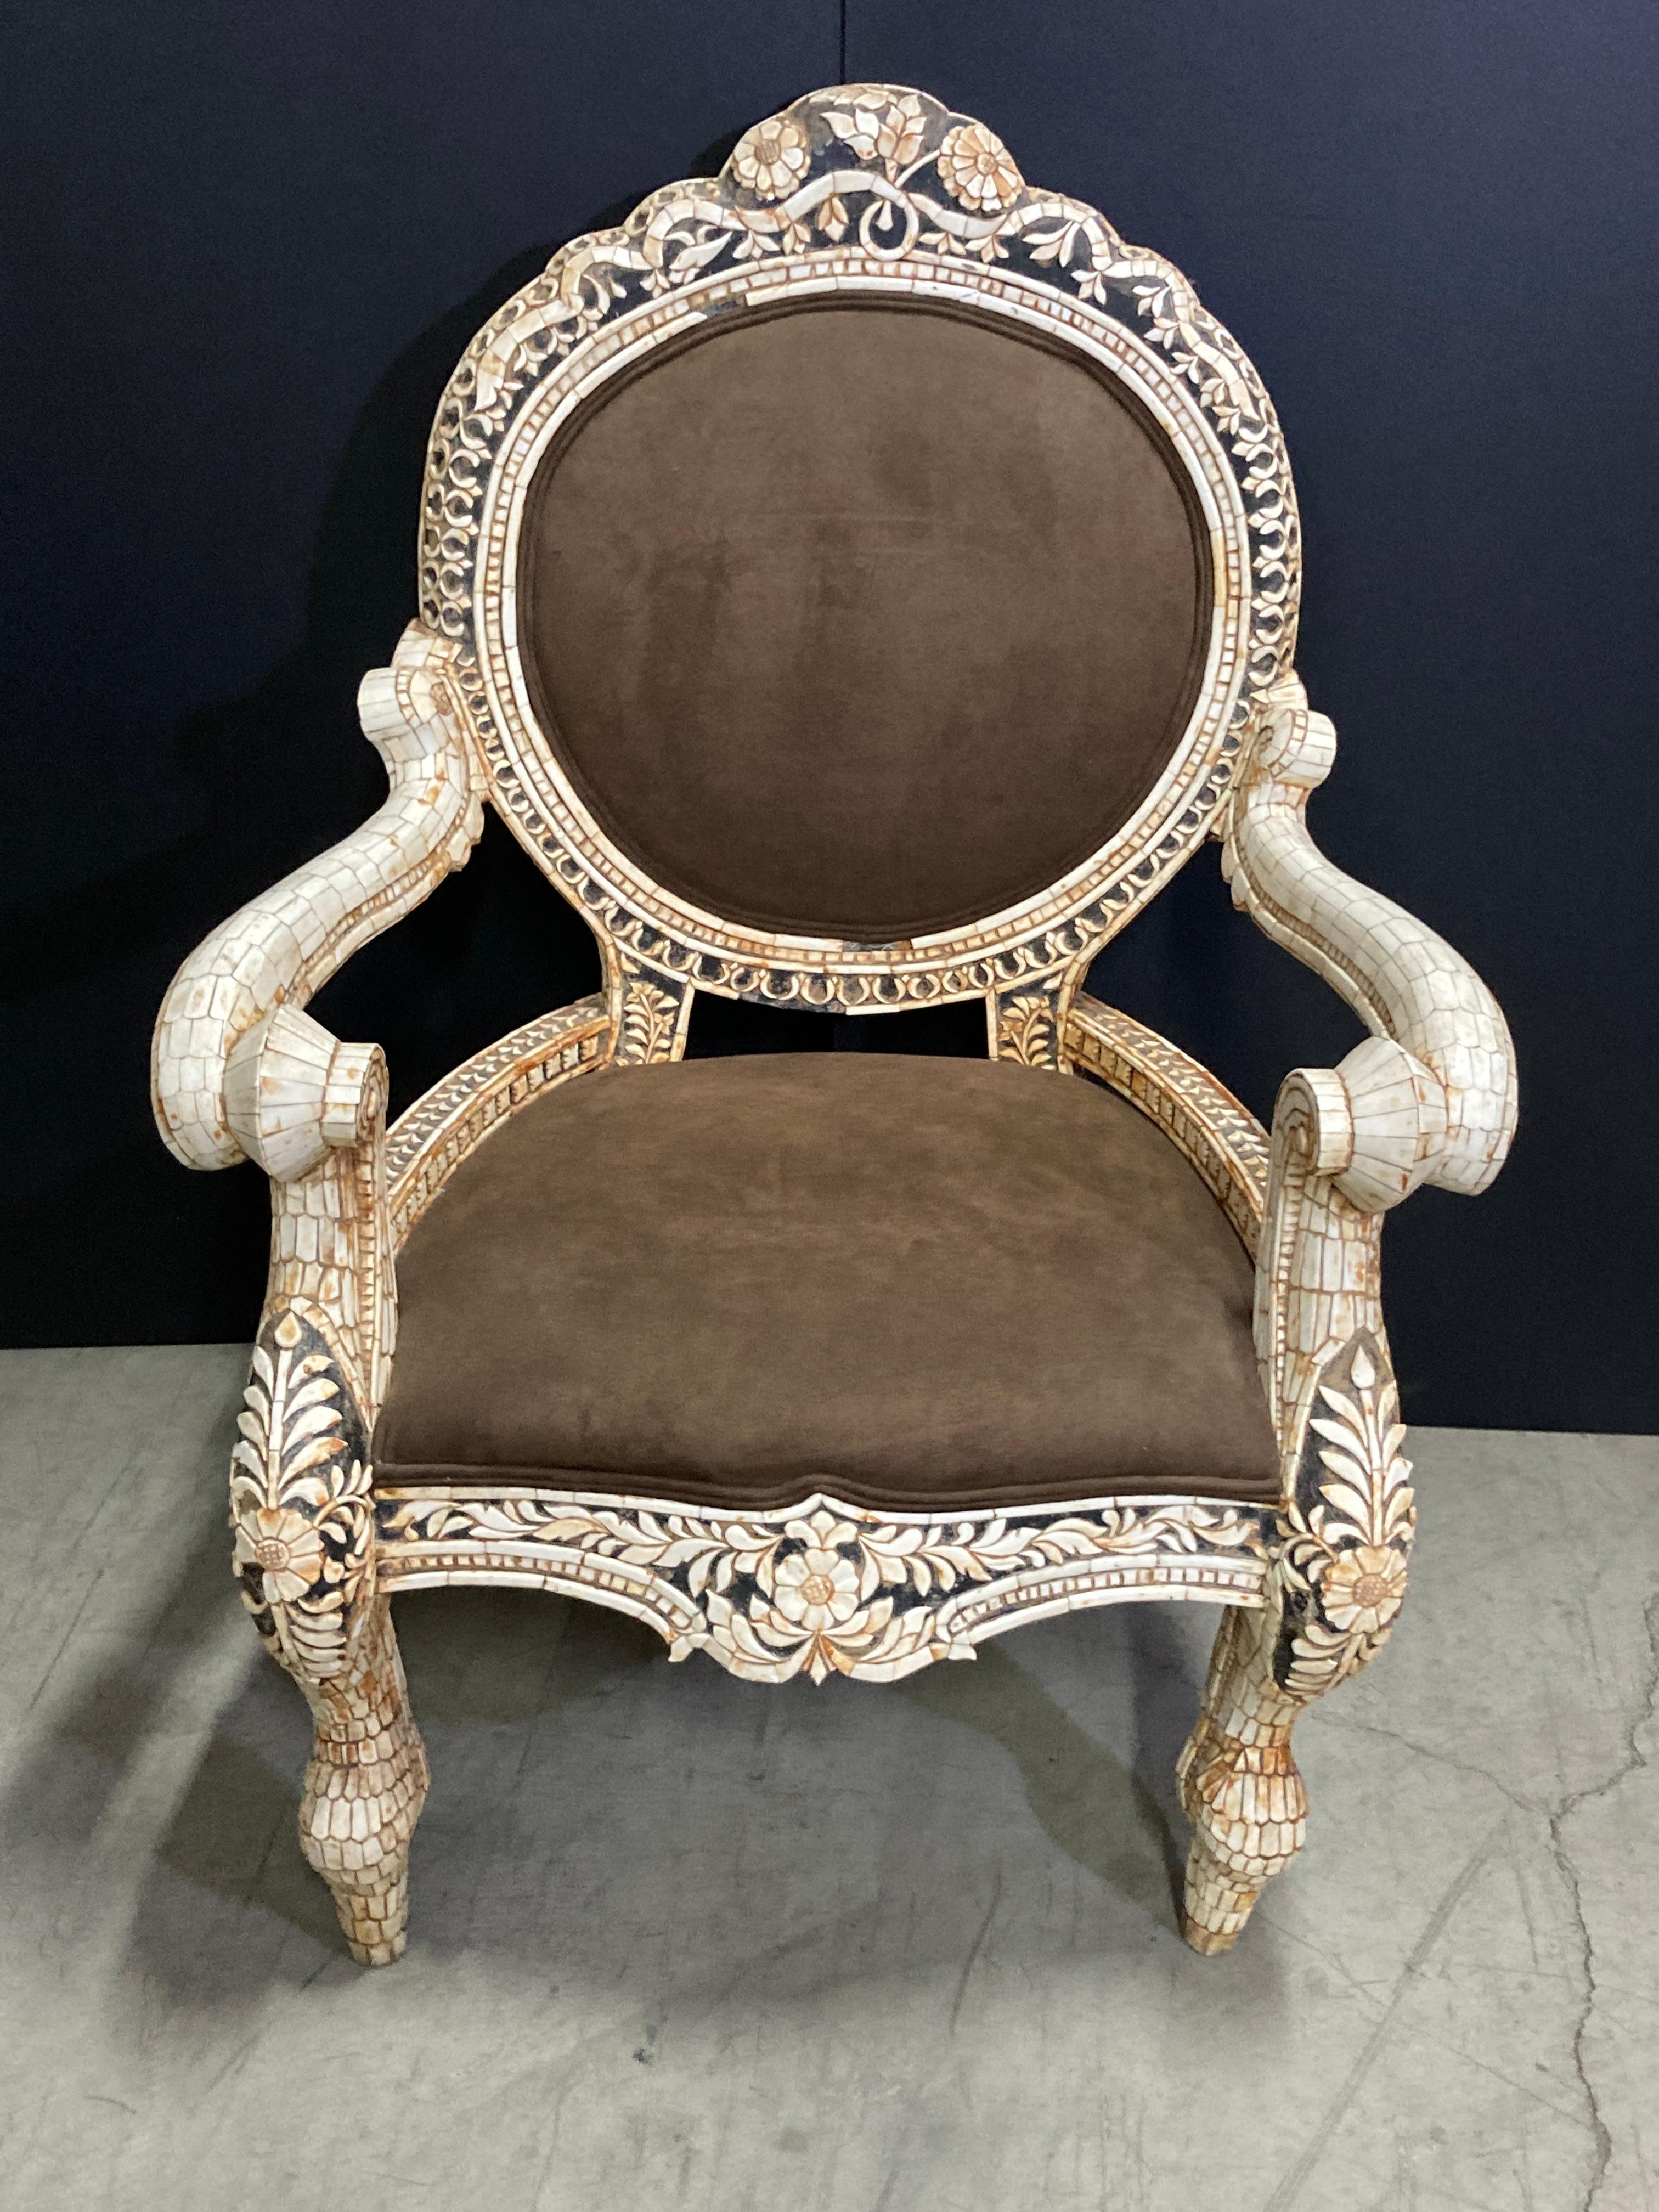 Amazing Indian bone inlaid armchair featuring a shaped back and cabriole leg.
Fabulous one of a kind throne armchair heavily inlaid with carved recycled buffalo Horn.
Will look fabulous in a Moorish Moroccan Mughal Interior decor.
Anglo Indian